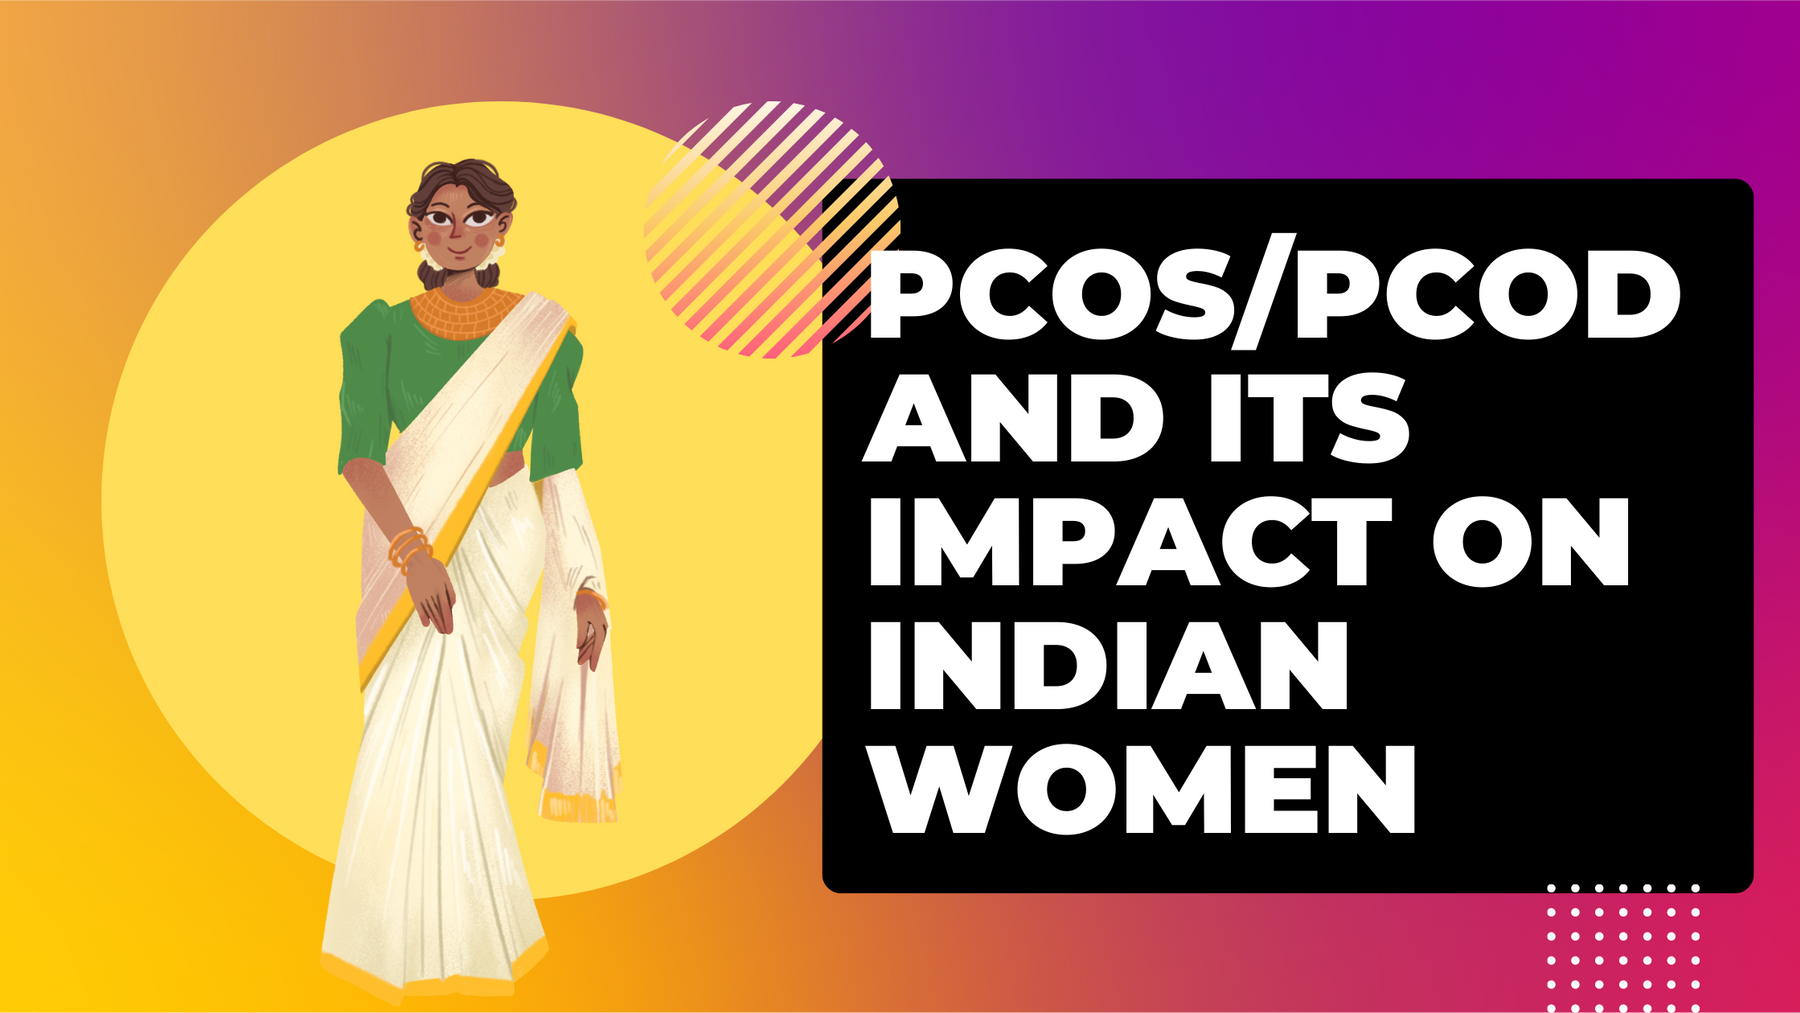 PCOS/PCOD In India.